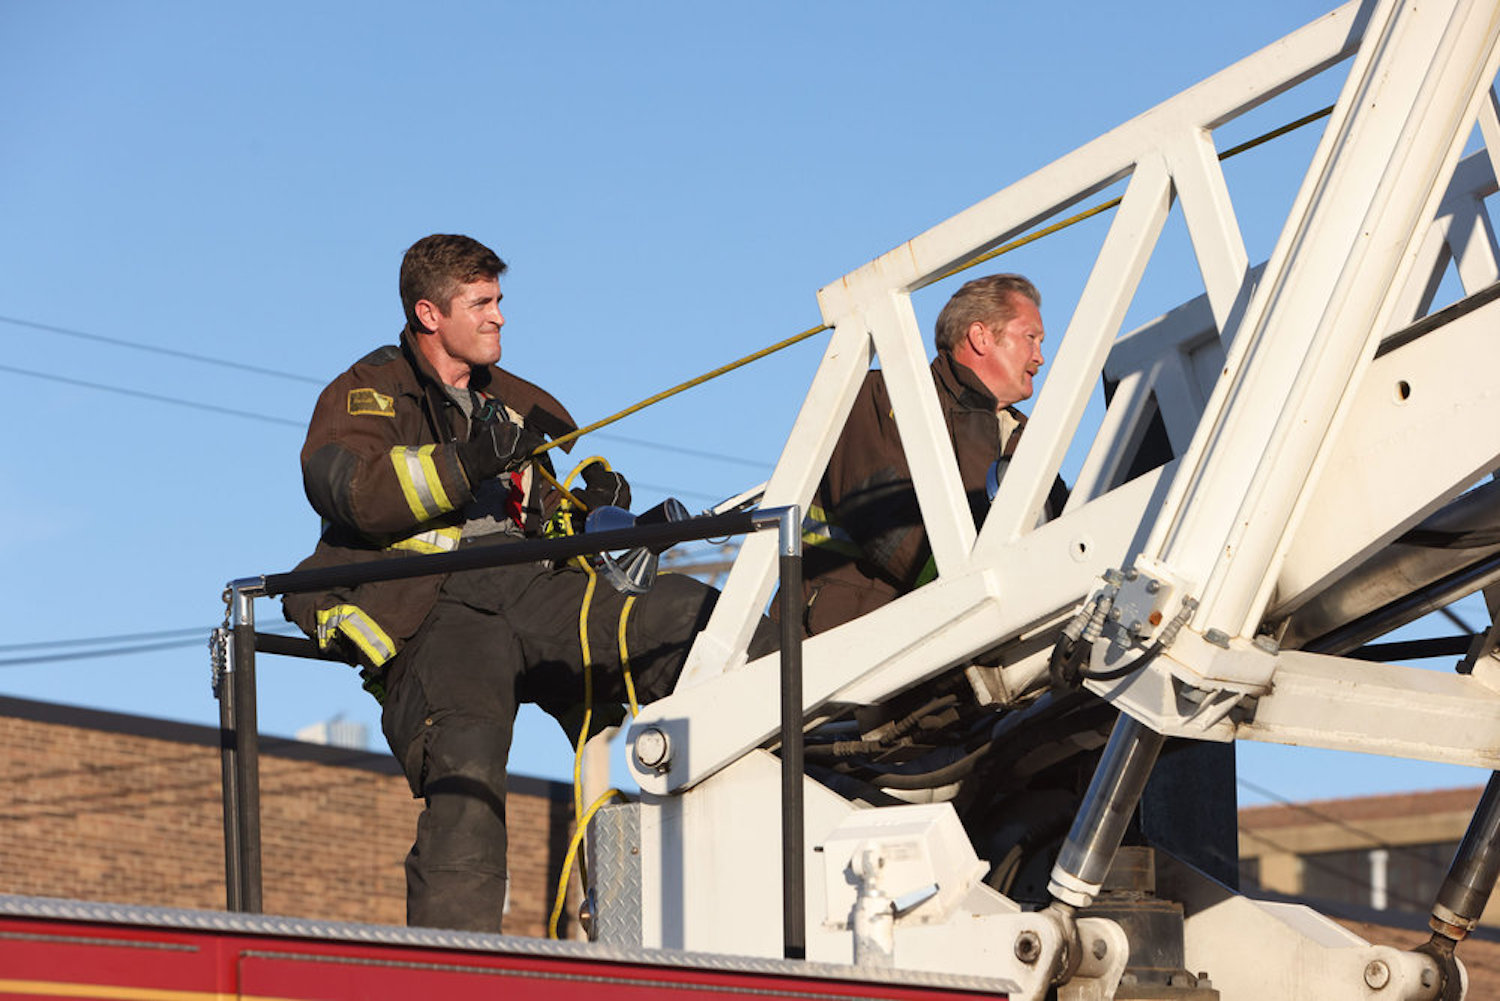 Sam Carver and Mouch attending to an emergency in 'Chicago Fire' Season 11 Episode 2